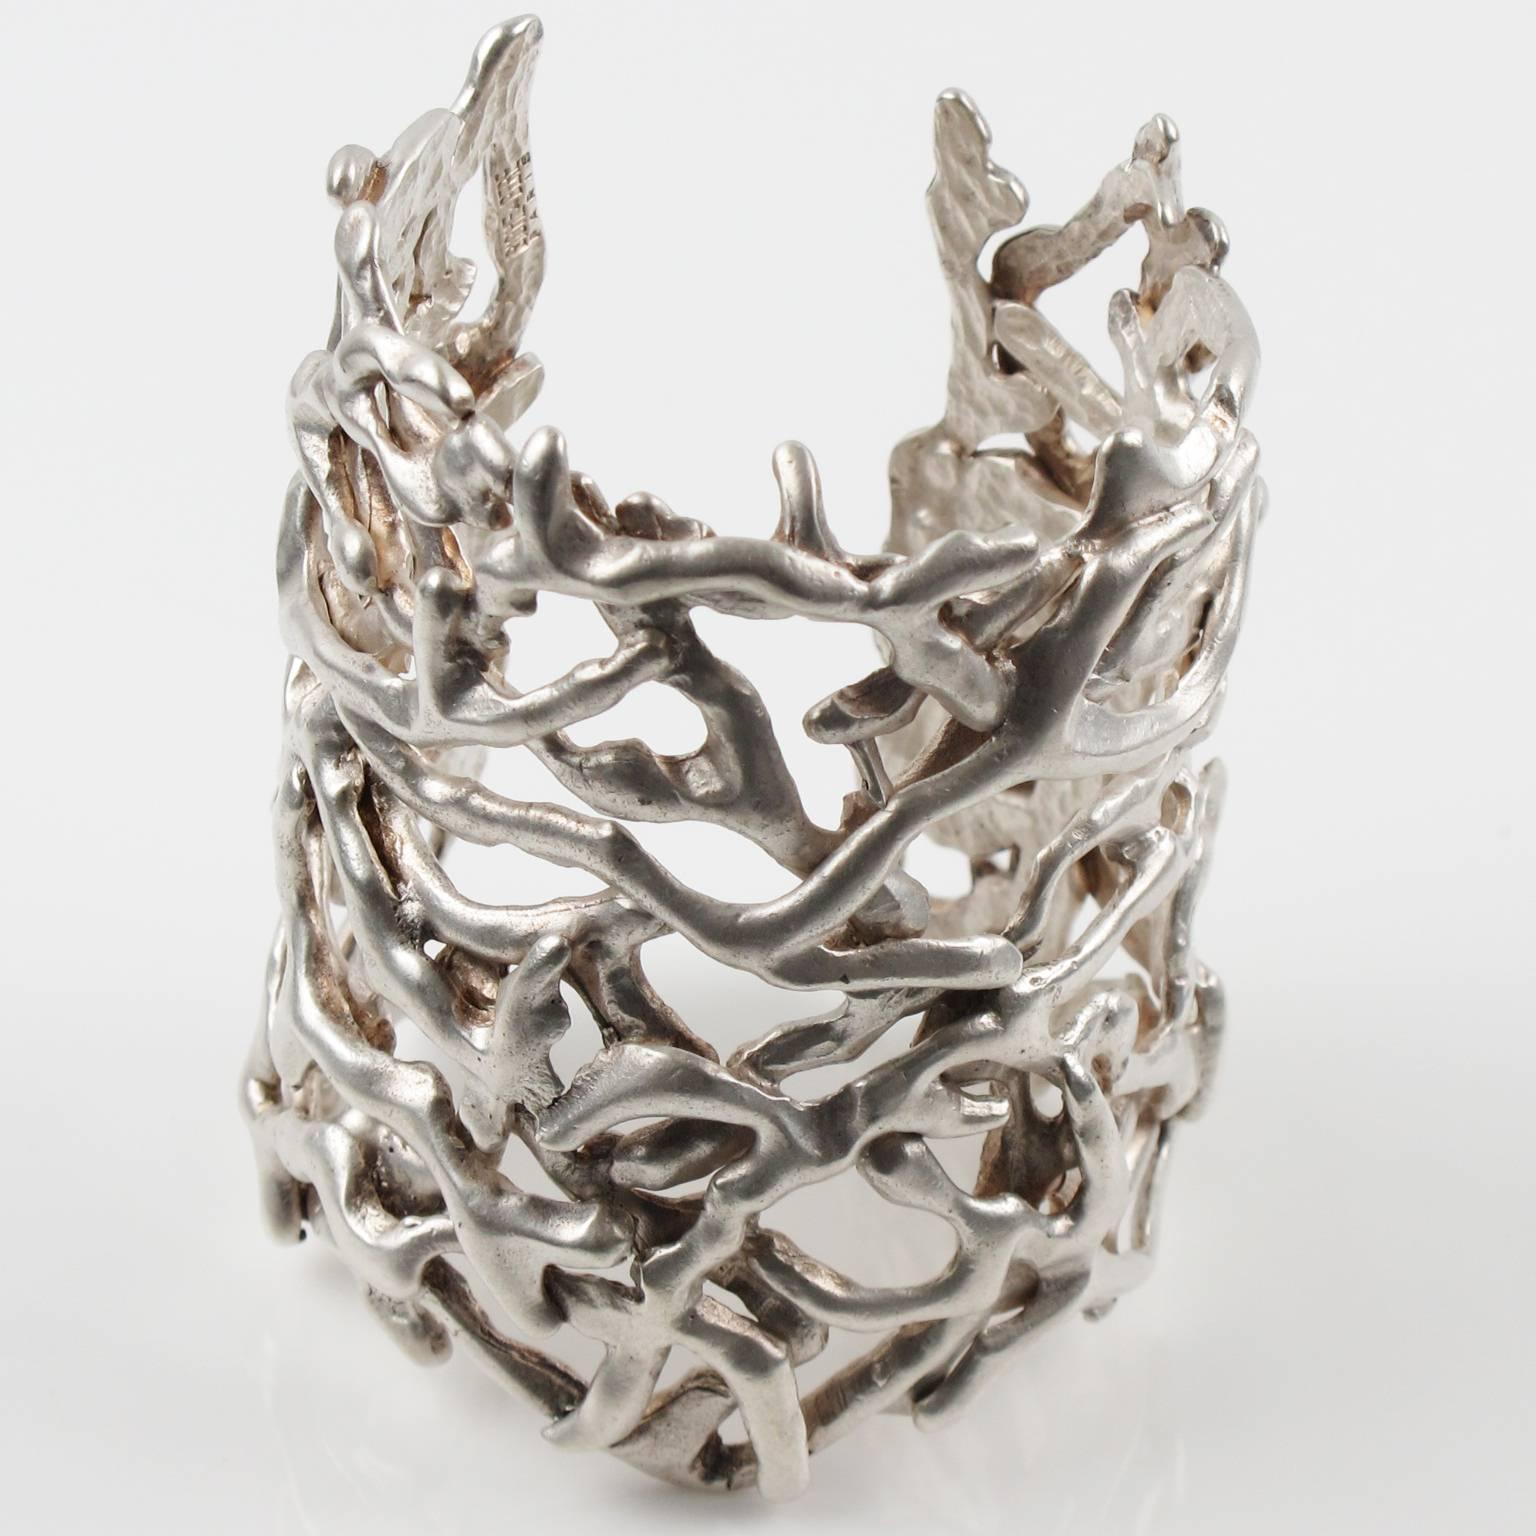 Stunning vintage modernist silver plate cuff bracelet by Nelly Biche de Bere Paris. Chunky massive oversized slave cuff bangle with brutalist carved and see thru design, featuring intricate branches. Marked in the inside: 'Biche de Bere' and